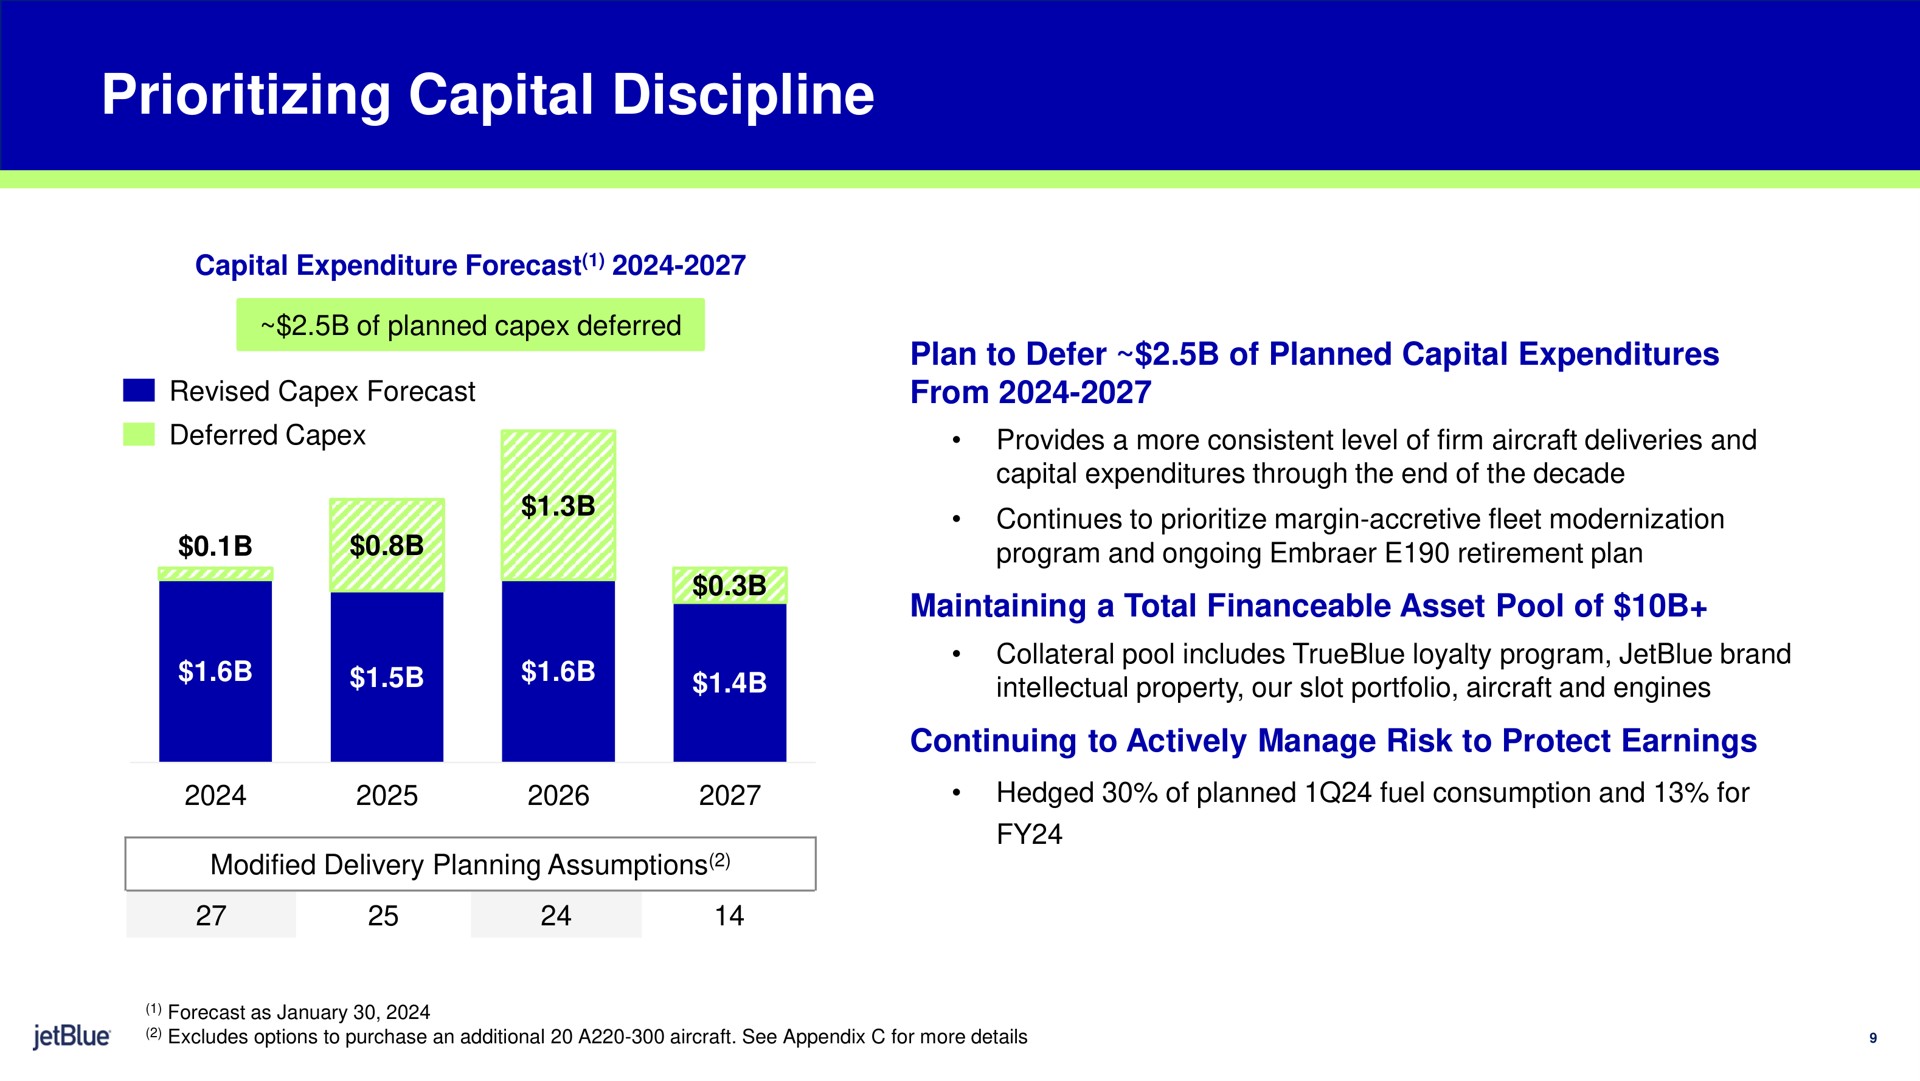 capital discipline plan to defer of planned capital expenditures from maintaining a total asset pool of continuing to actively manage risk to protect earnings deferred ses provides more consistent level firm aircraft deliveries and intellectual property our slot porto and engines | jetBlue